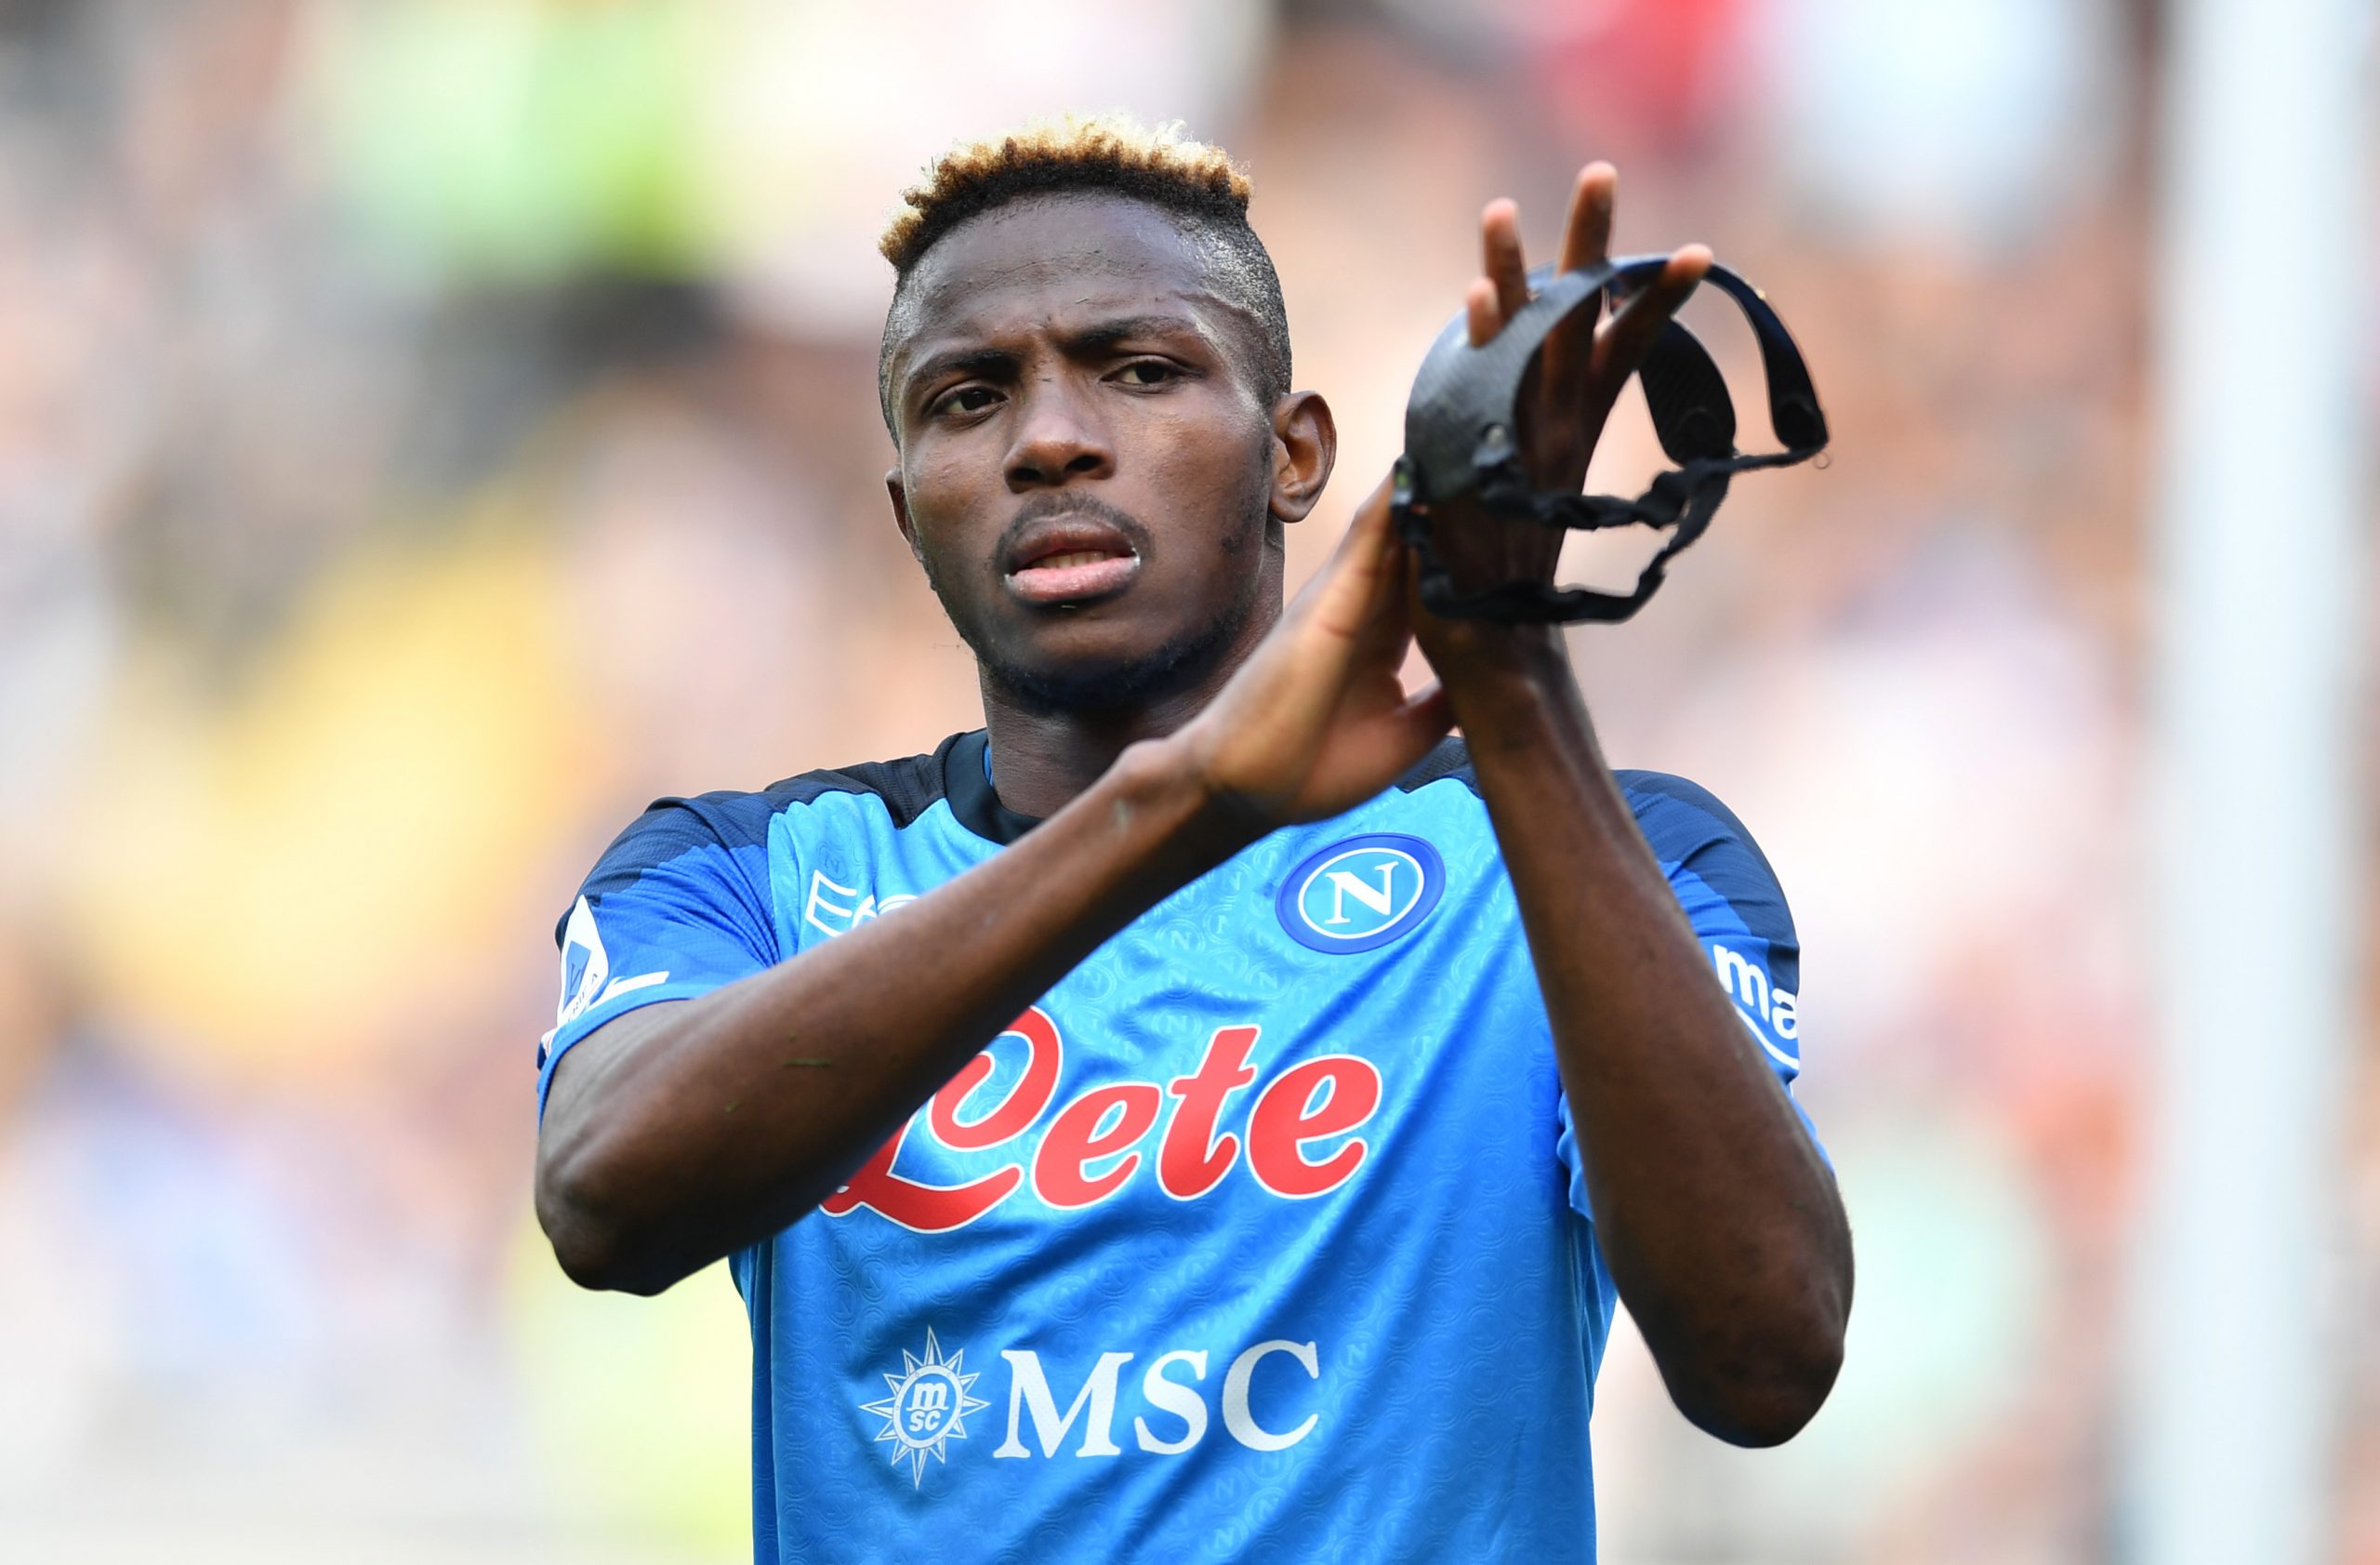 Napoli chief confident Manchester United target Victor Osimhen will stay this summer.